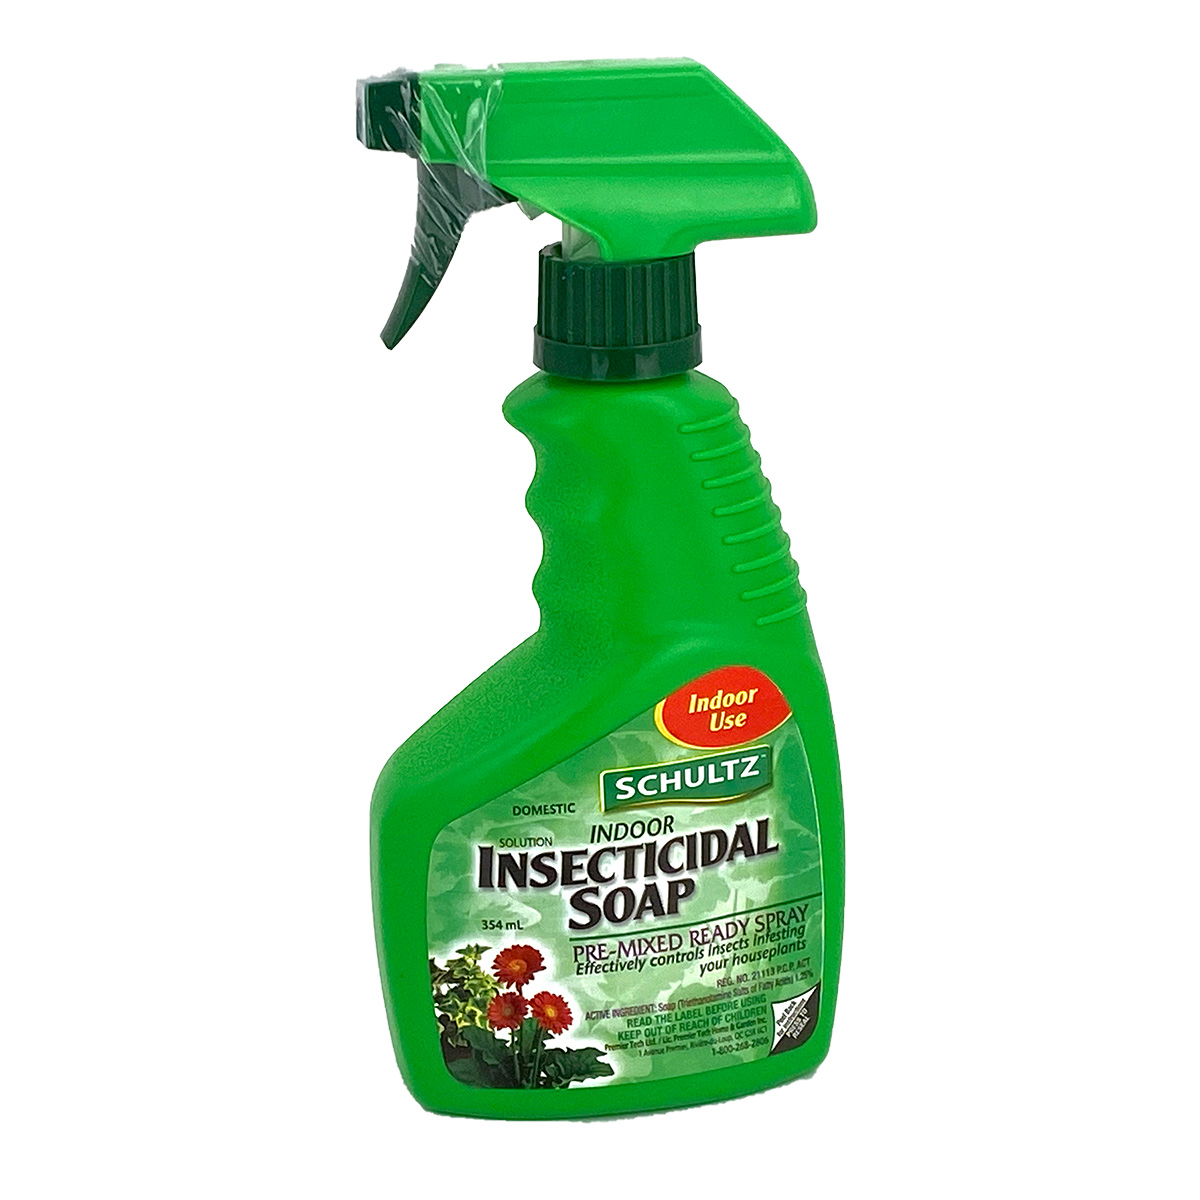 Schultz_InsecticidalSoap_354ml.jpg